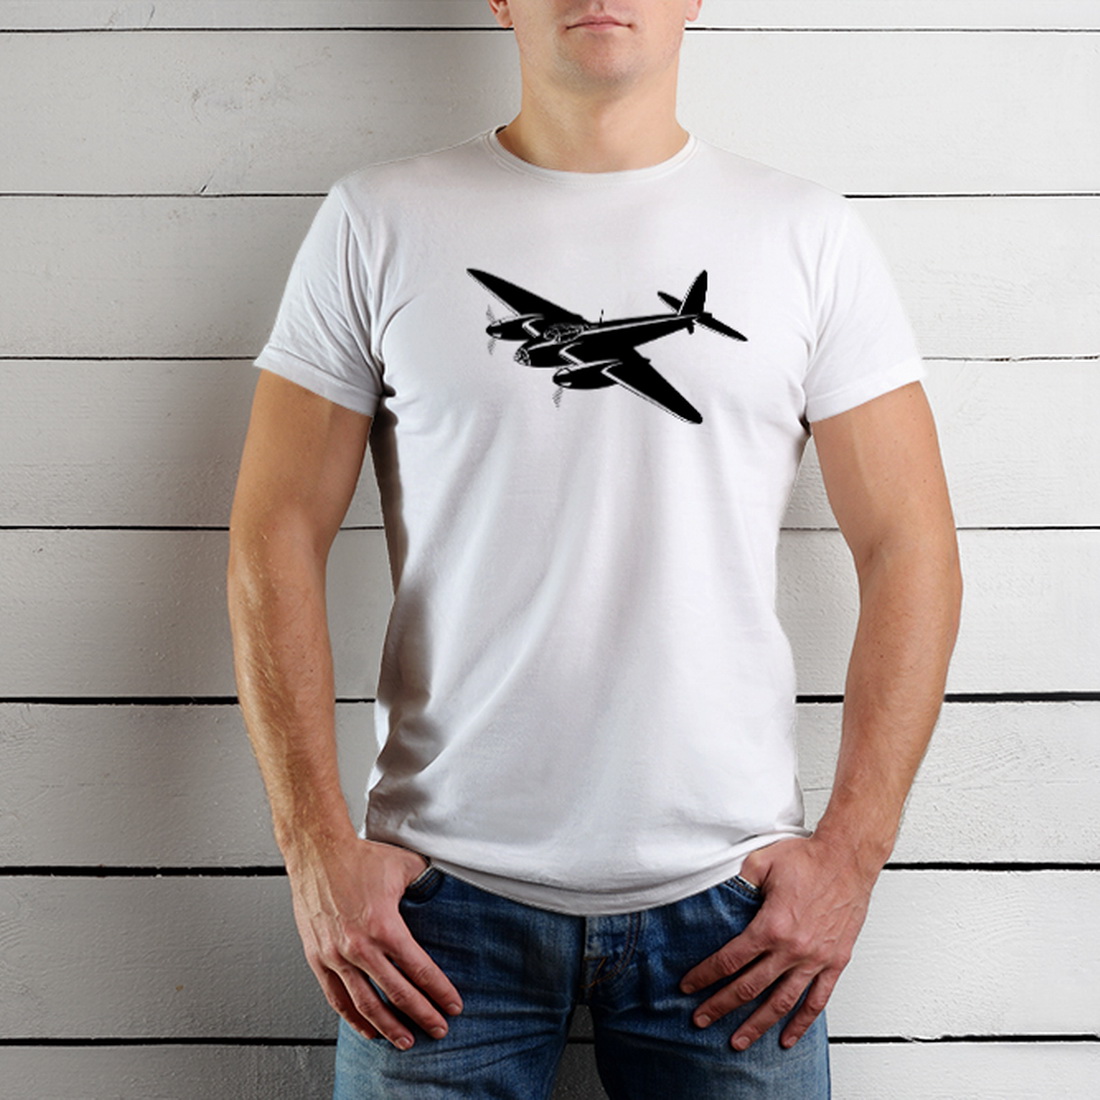 White t-shirt with a classic airplane.